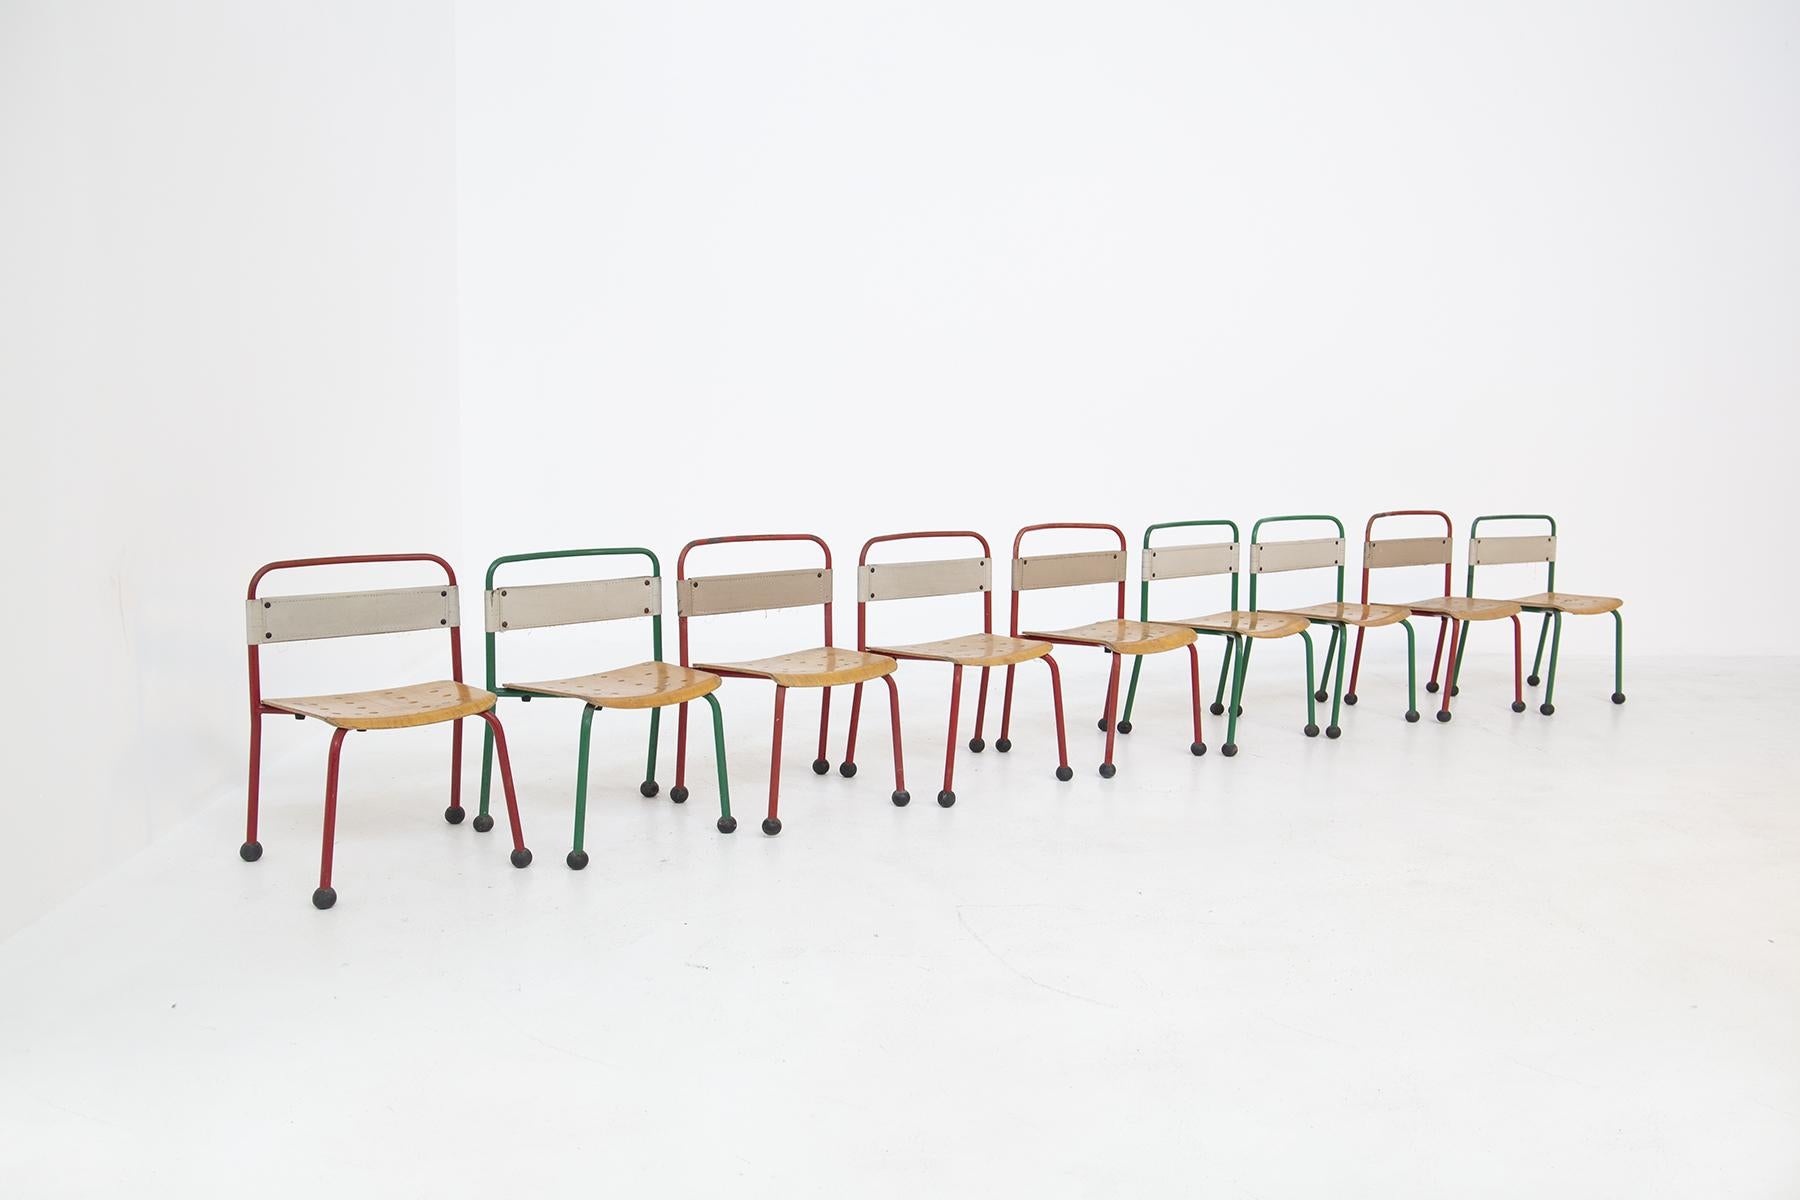 Lovely set of nine children's chairs from the 1970s. Set is made of tubular aluminum frame painted in red or green paint. The seat of the small chairs are made of wood with circular holes. French manufacture. The back of each chair is made of white